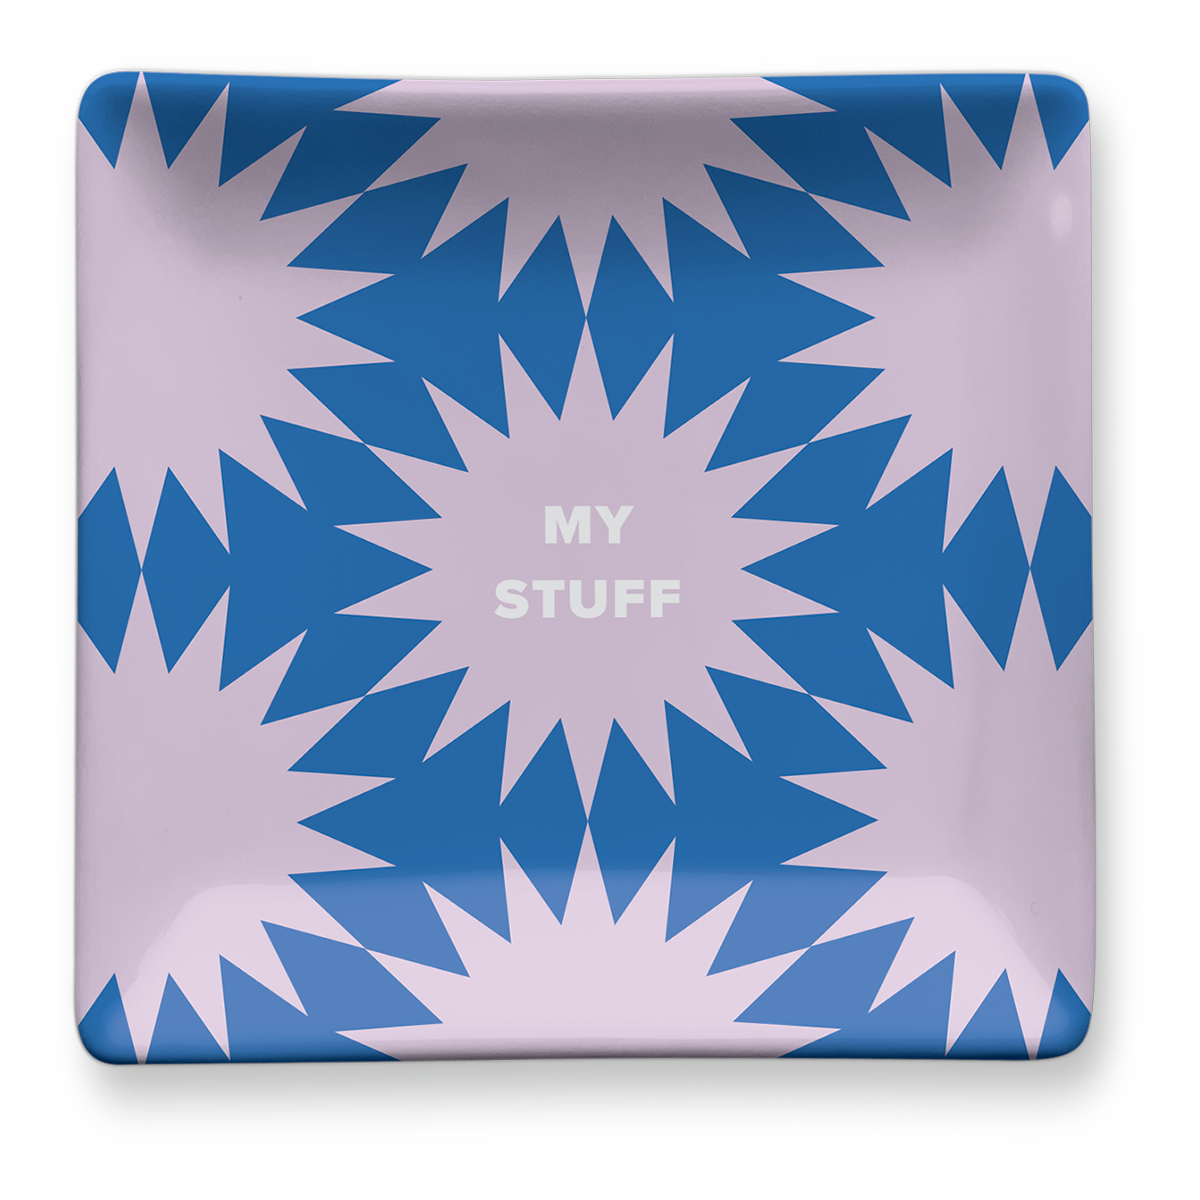 Statement Shapes Blue Trinket Tray Product